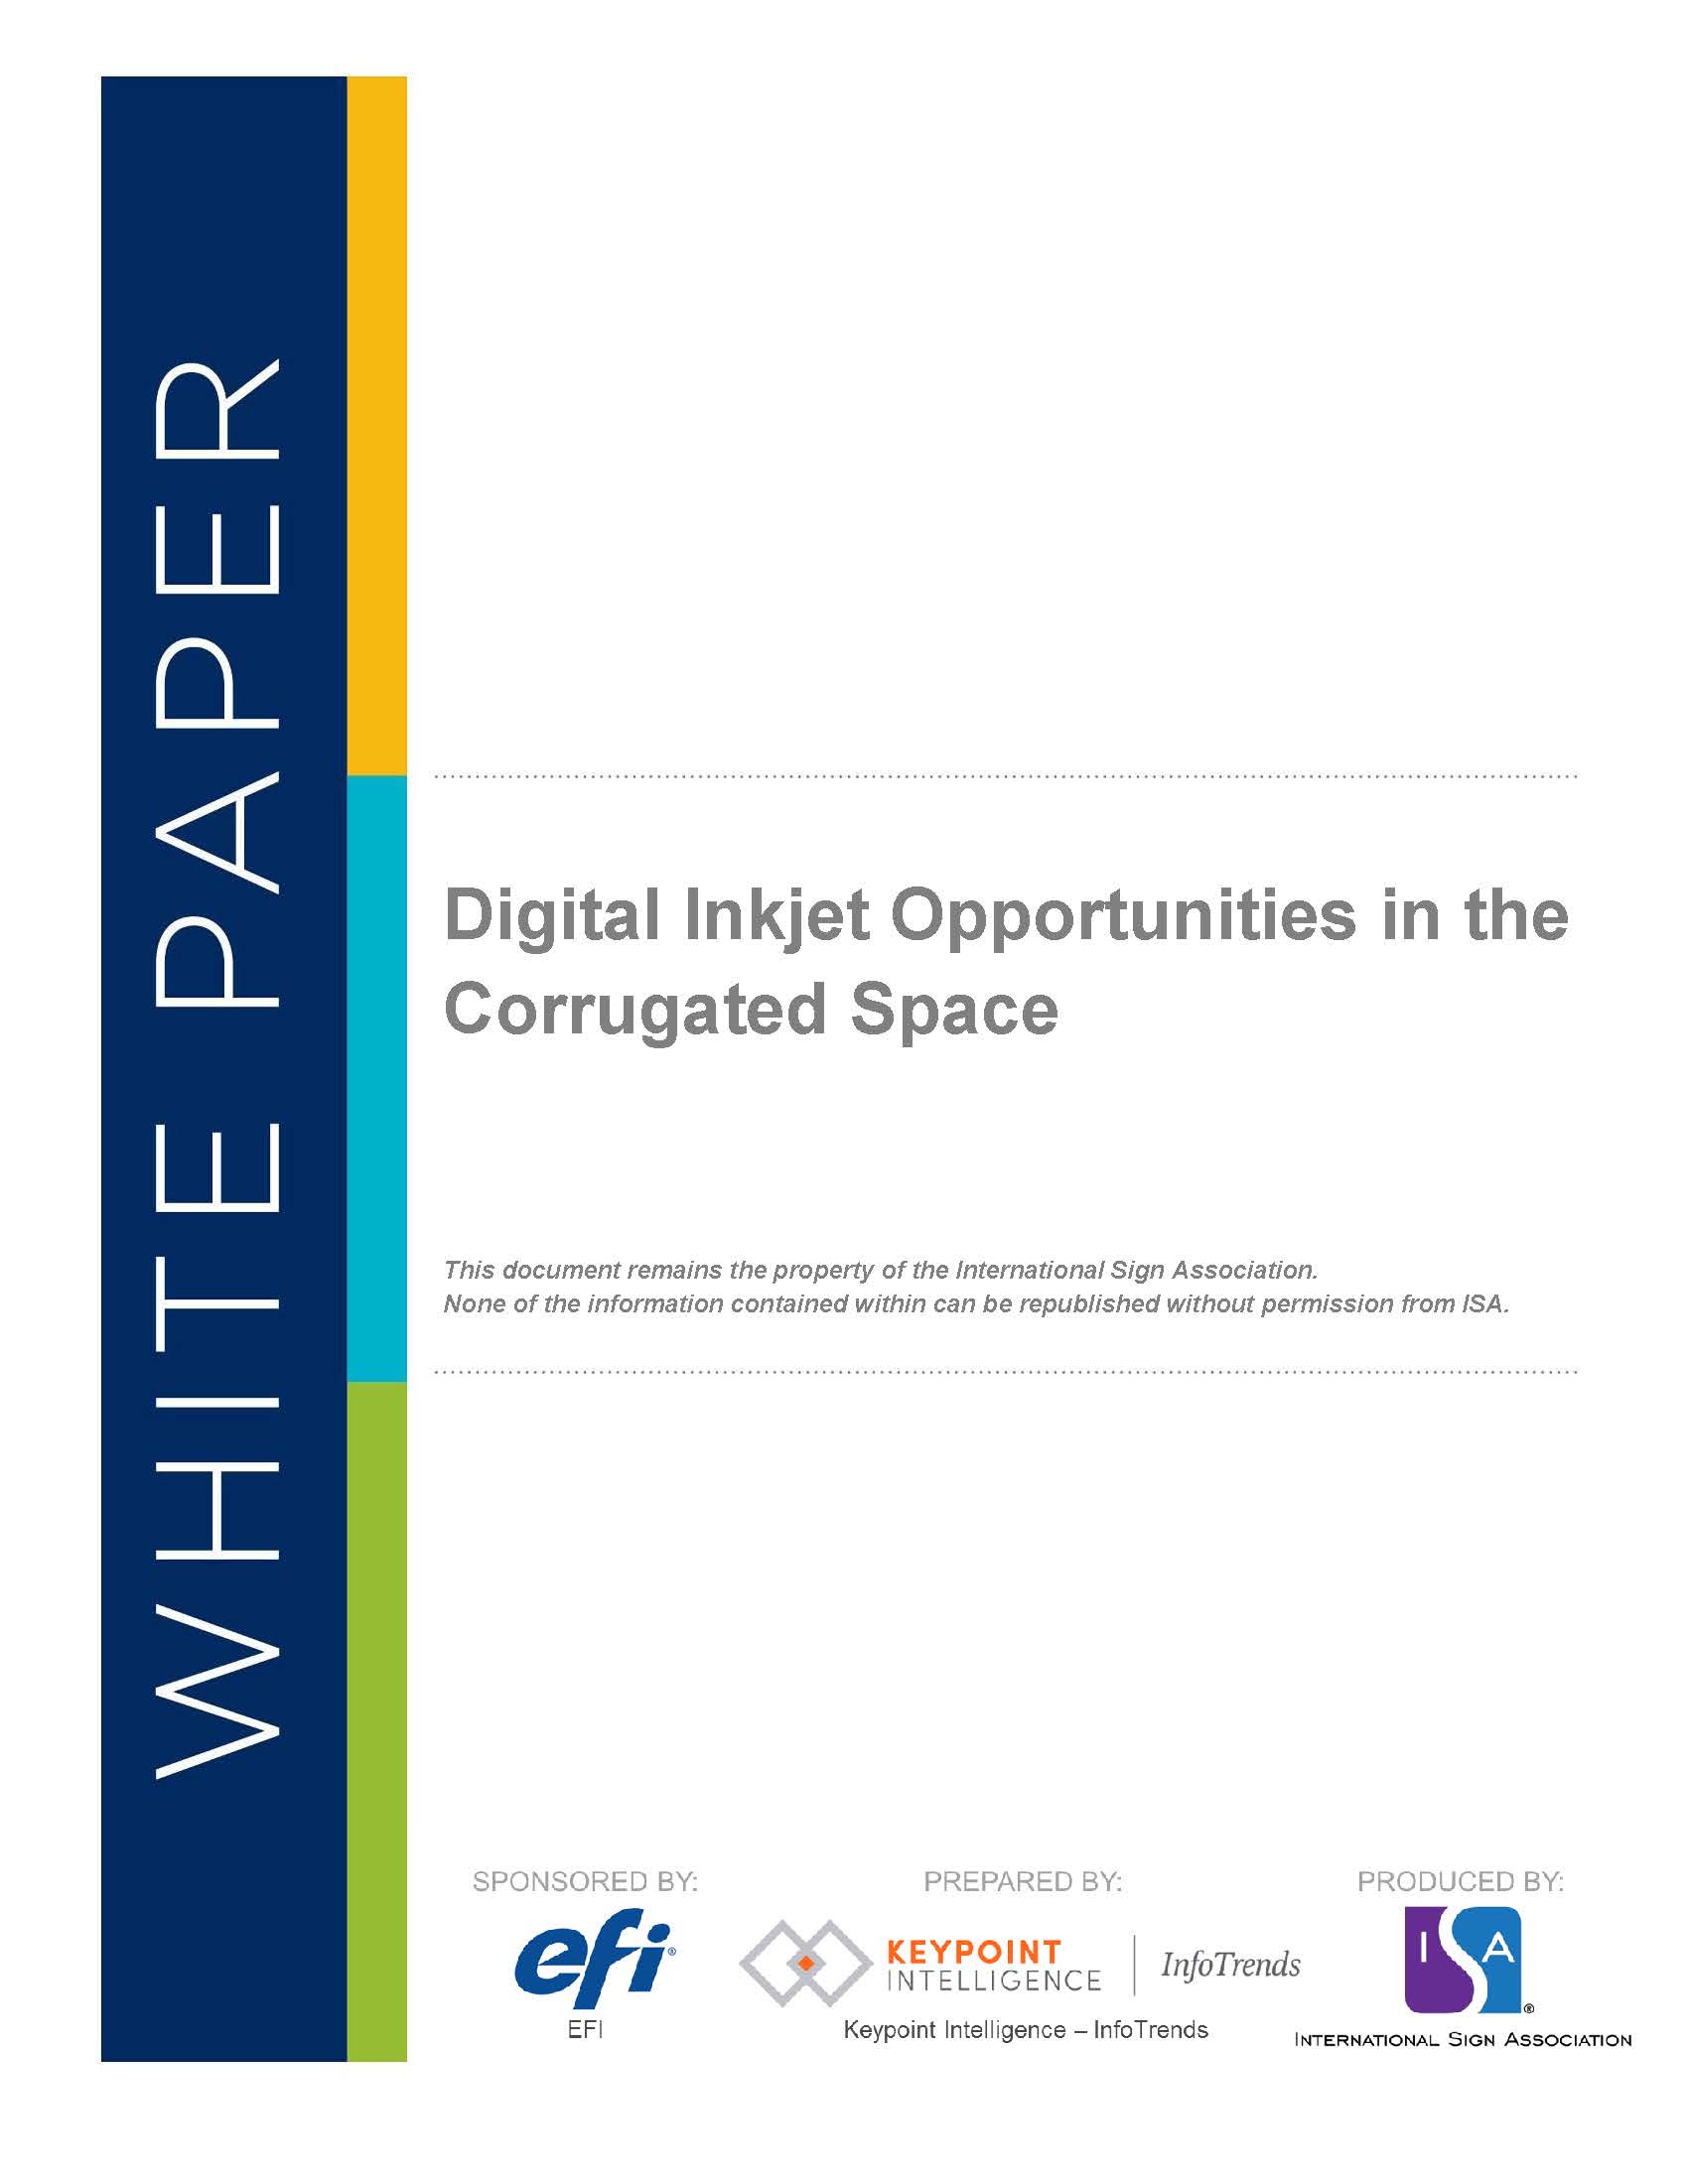 Digital Inkjet Opportunities in the Corrugated Space